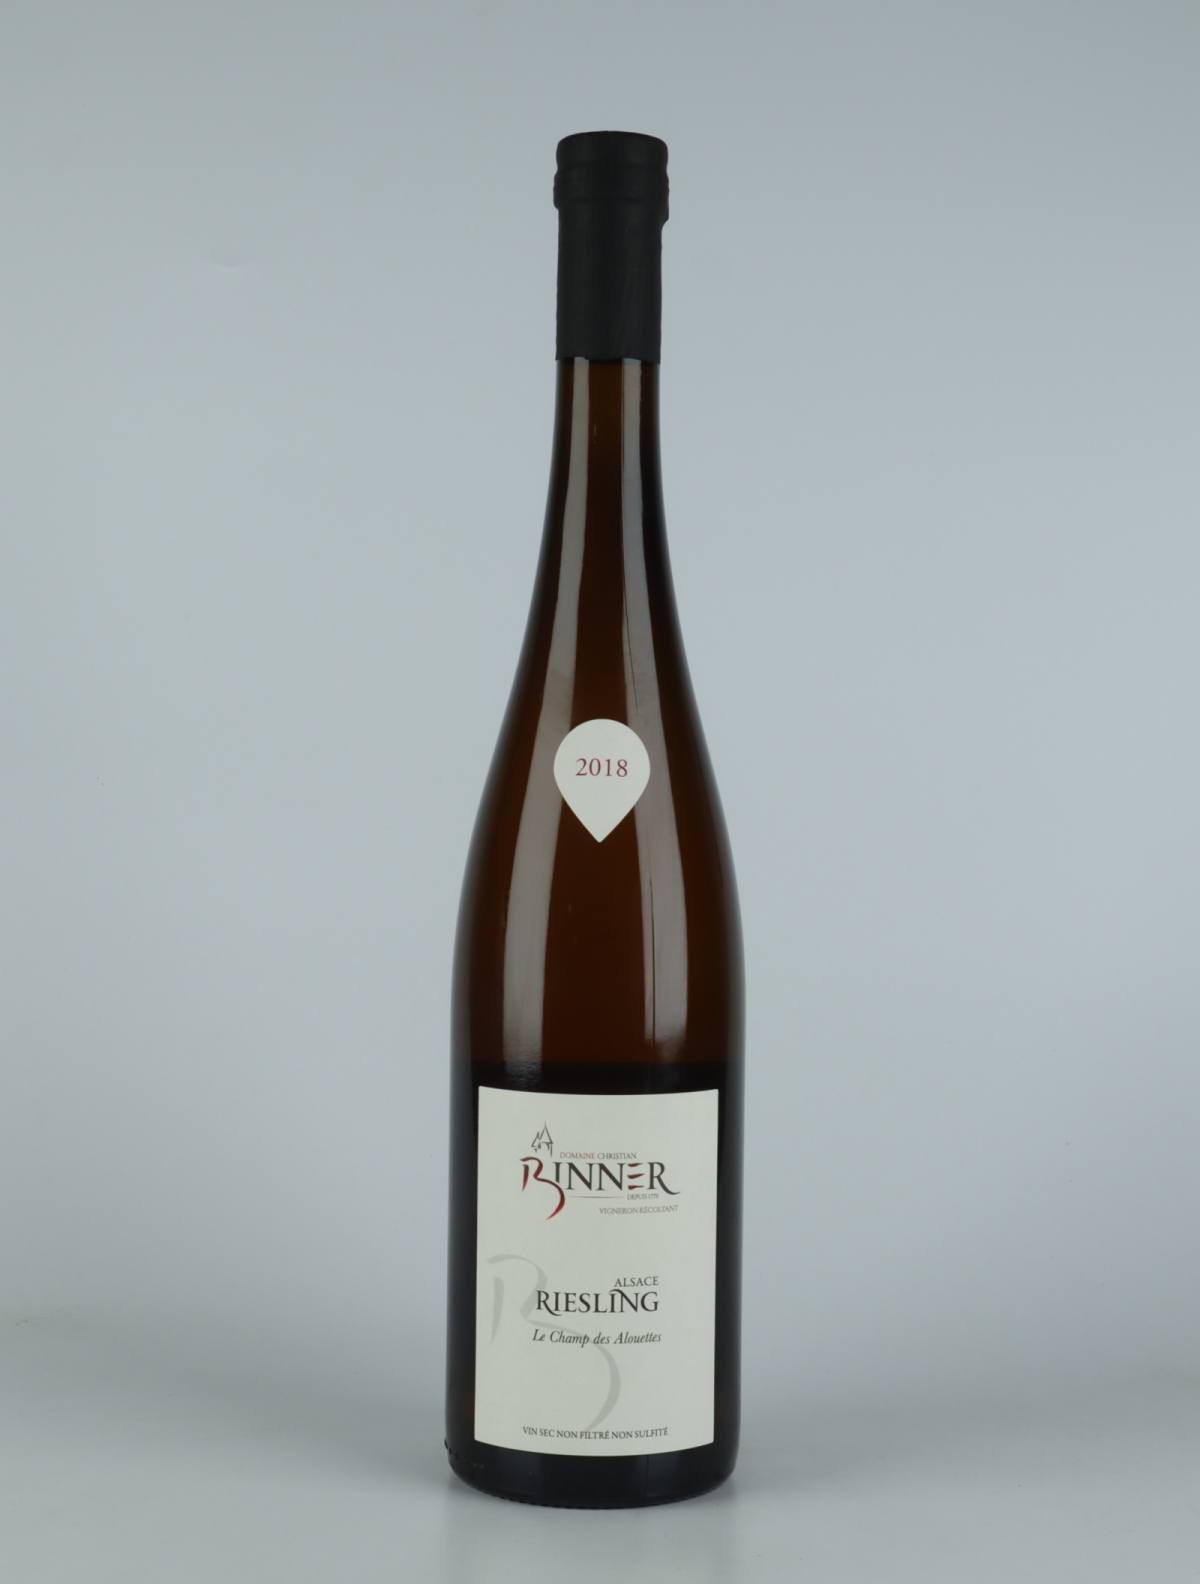 A bottle  Riesling - Champs des Alouettes White wine from Domaine Christian Binner, Alsace in France